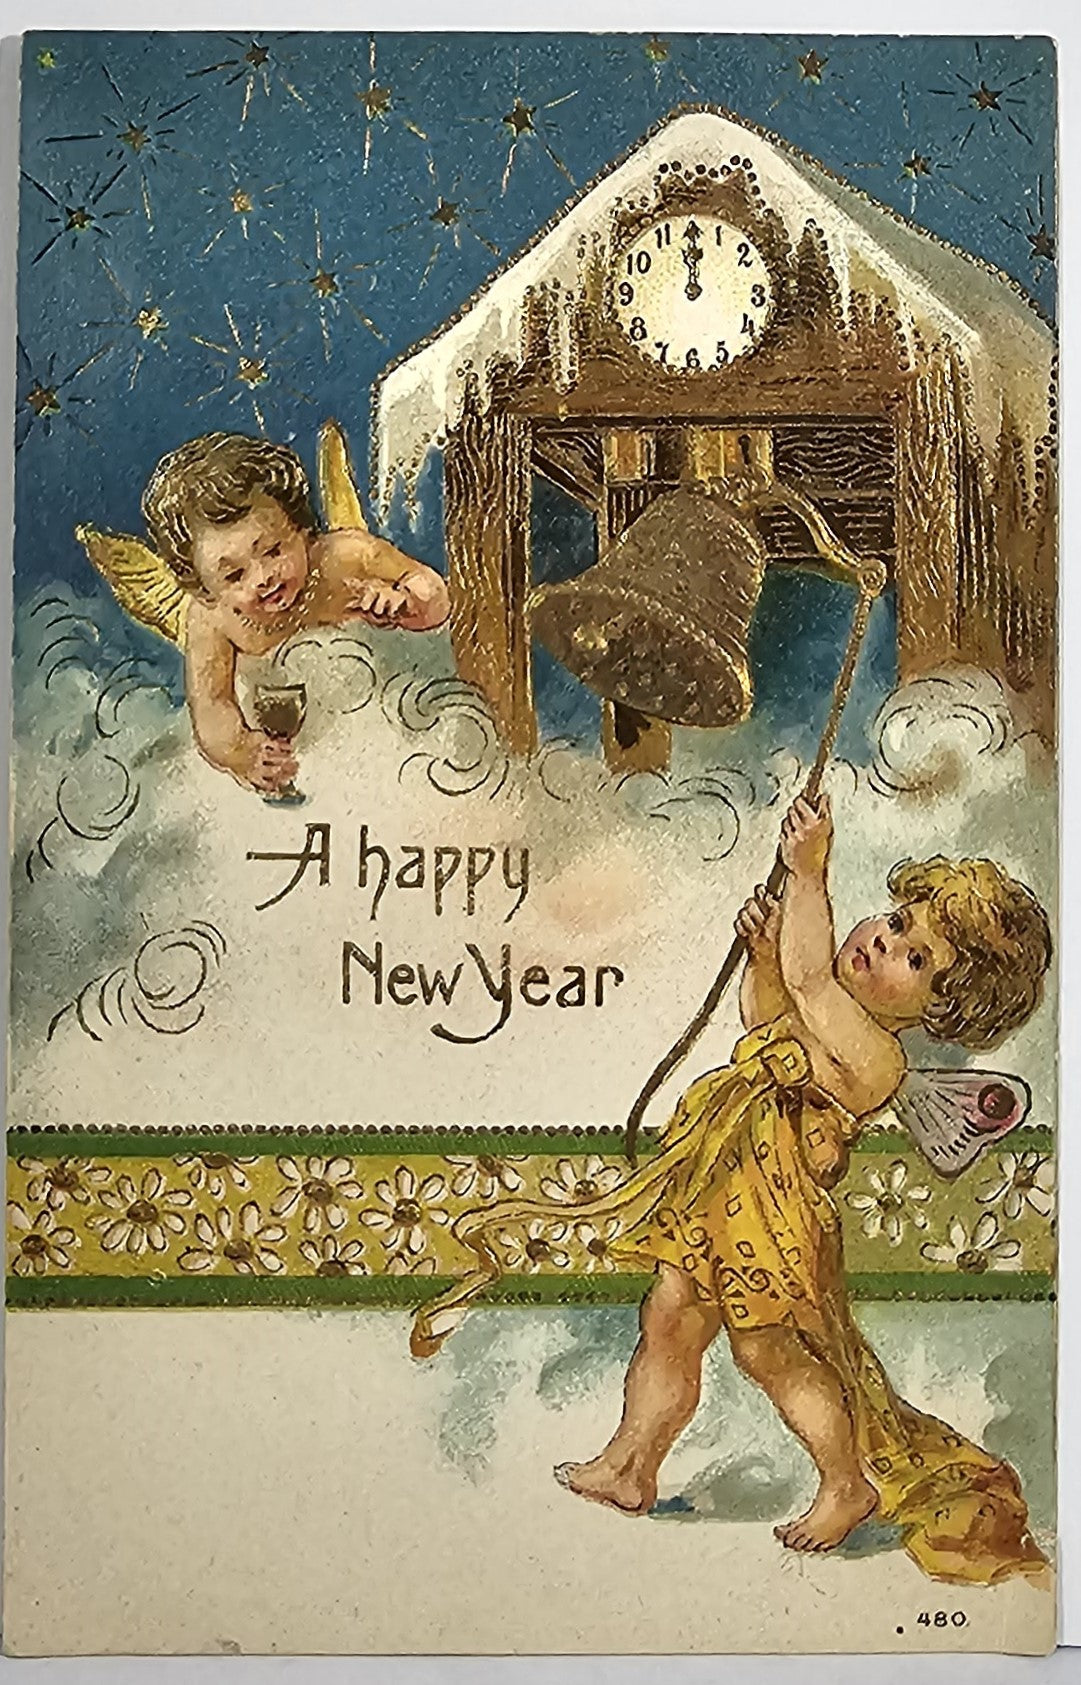 New Year Postcard Putti Cherubs Ringing Bells in Clouds Gold Embossed with Stars